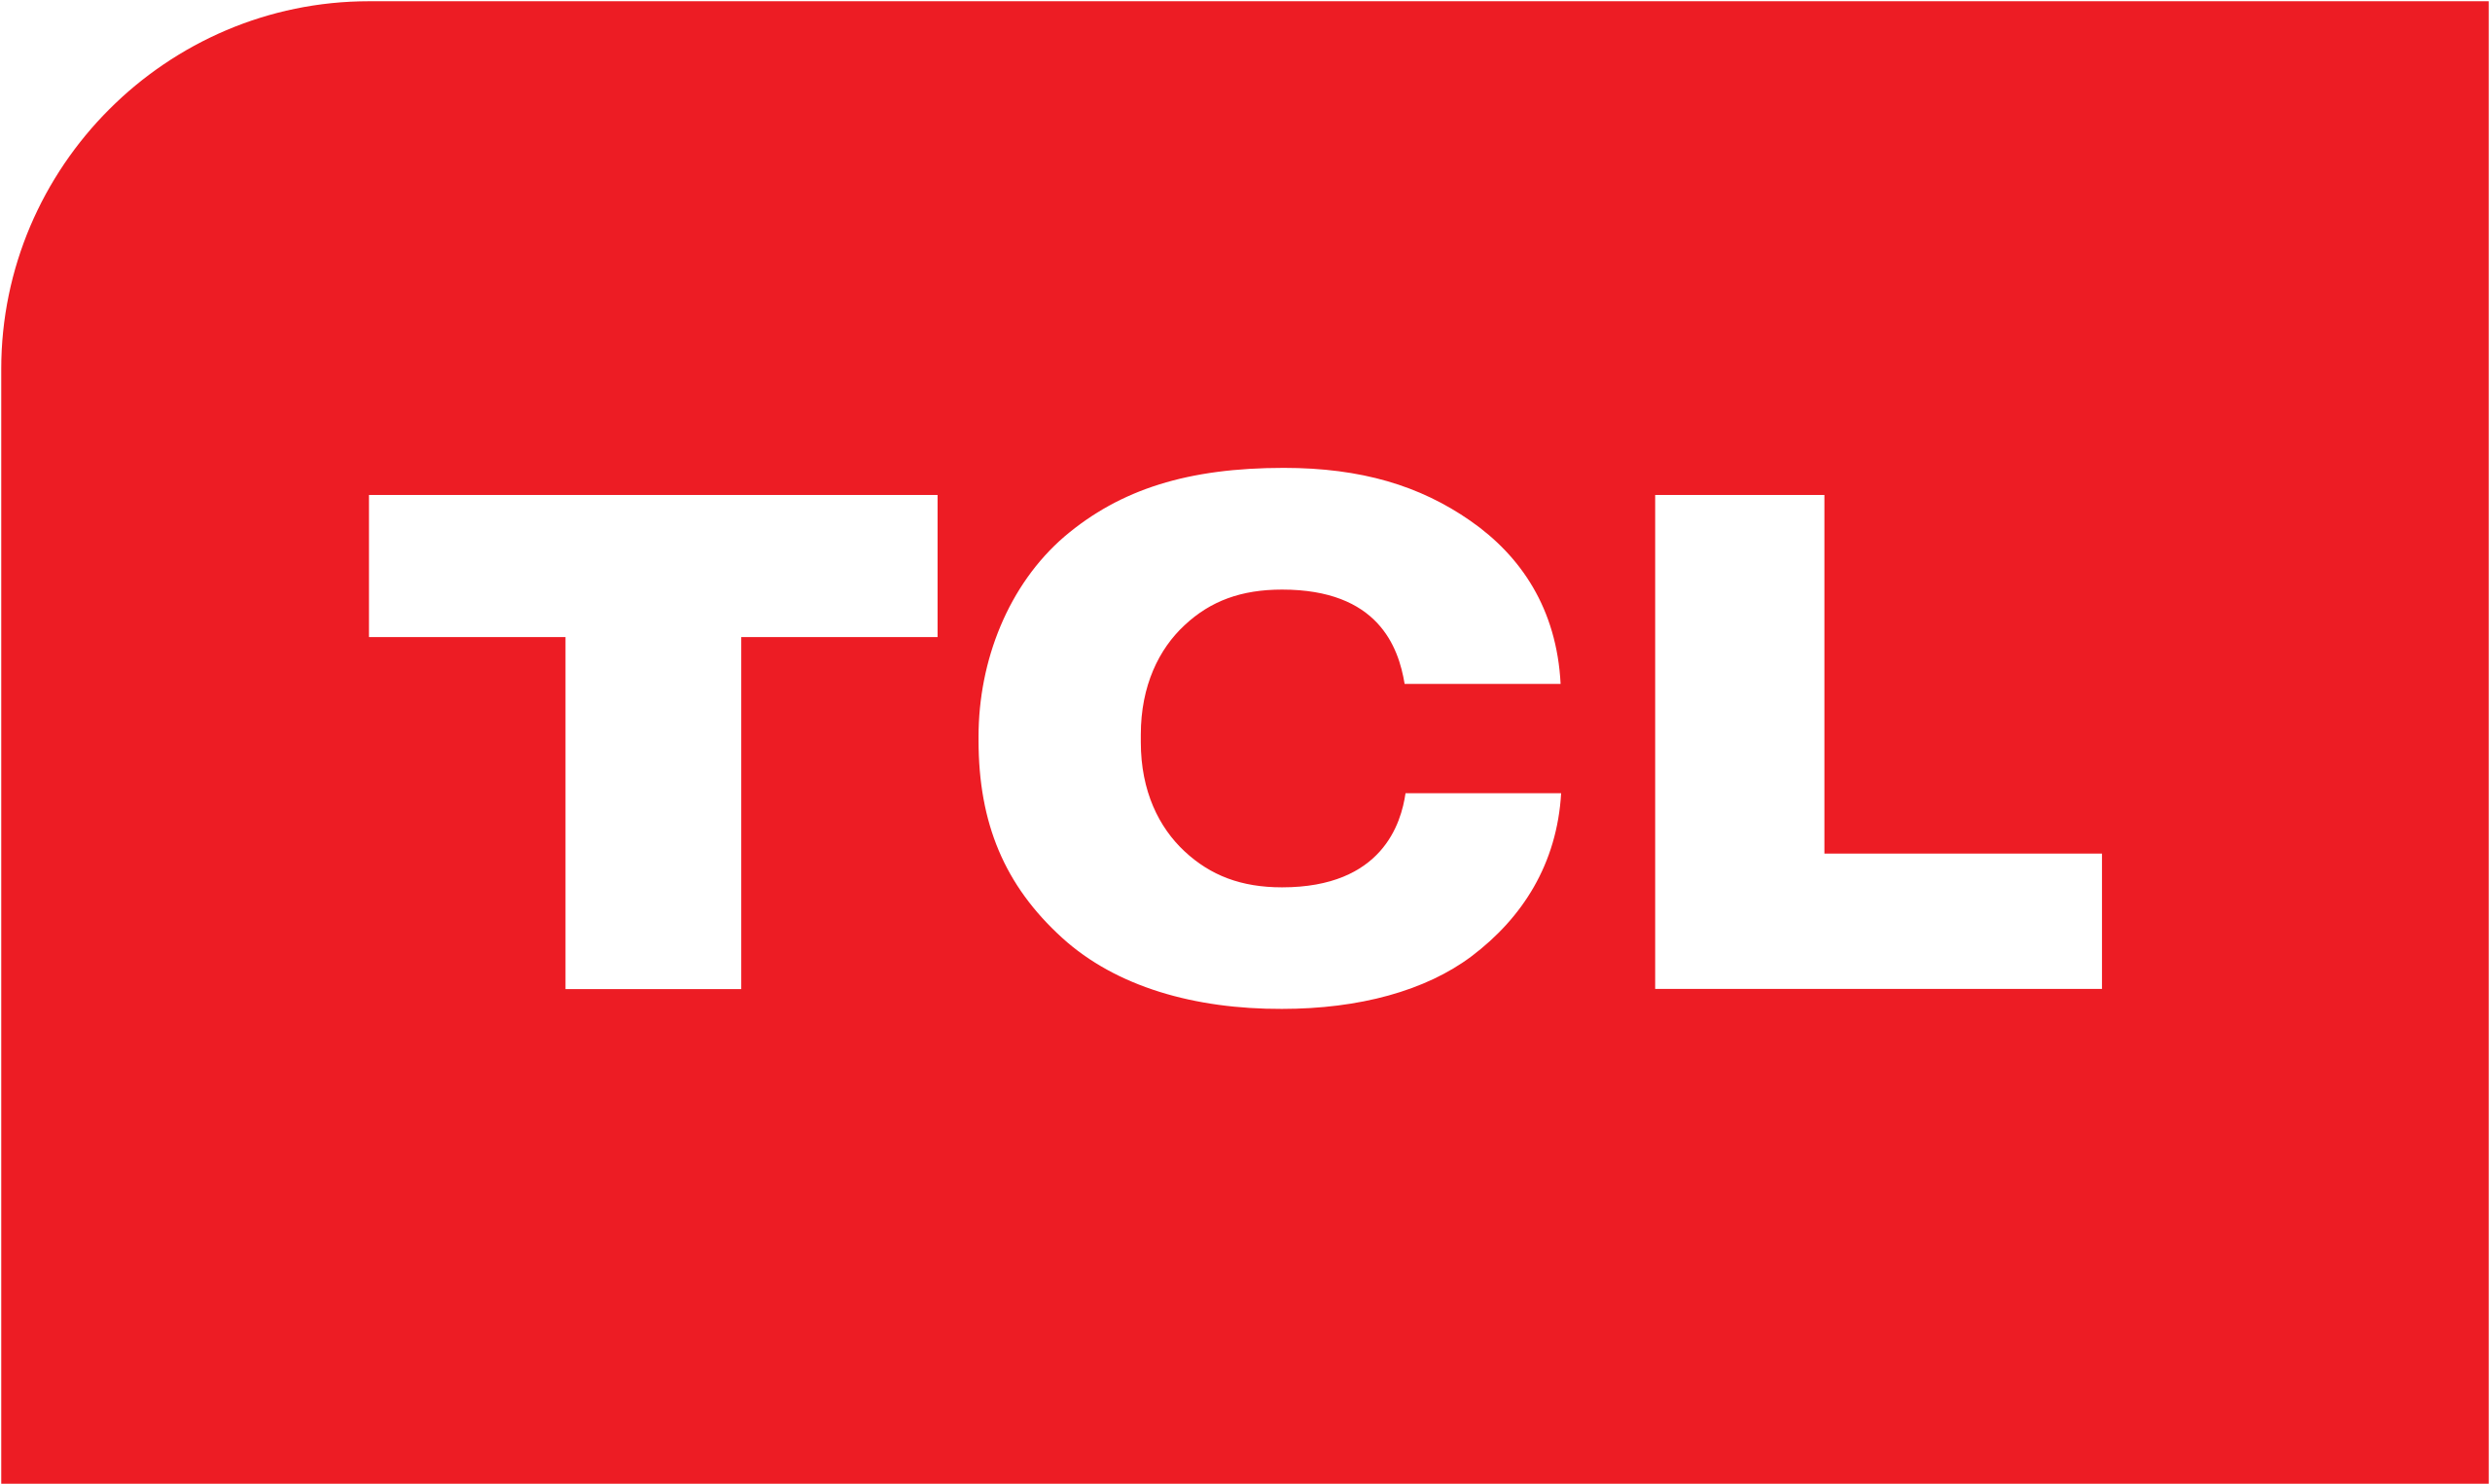 File:Logo of the TCL Corporation.svg - Wikipedia